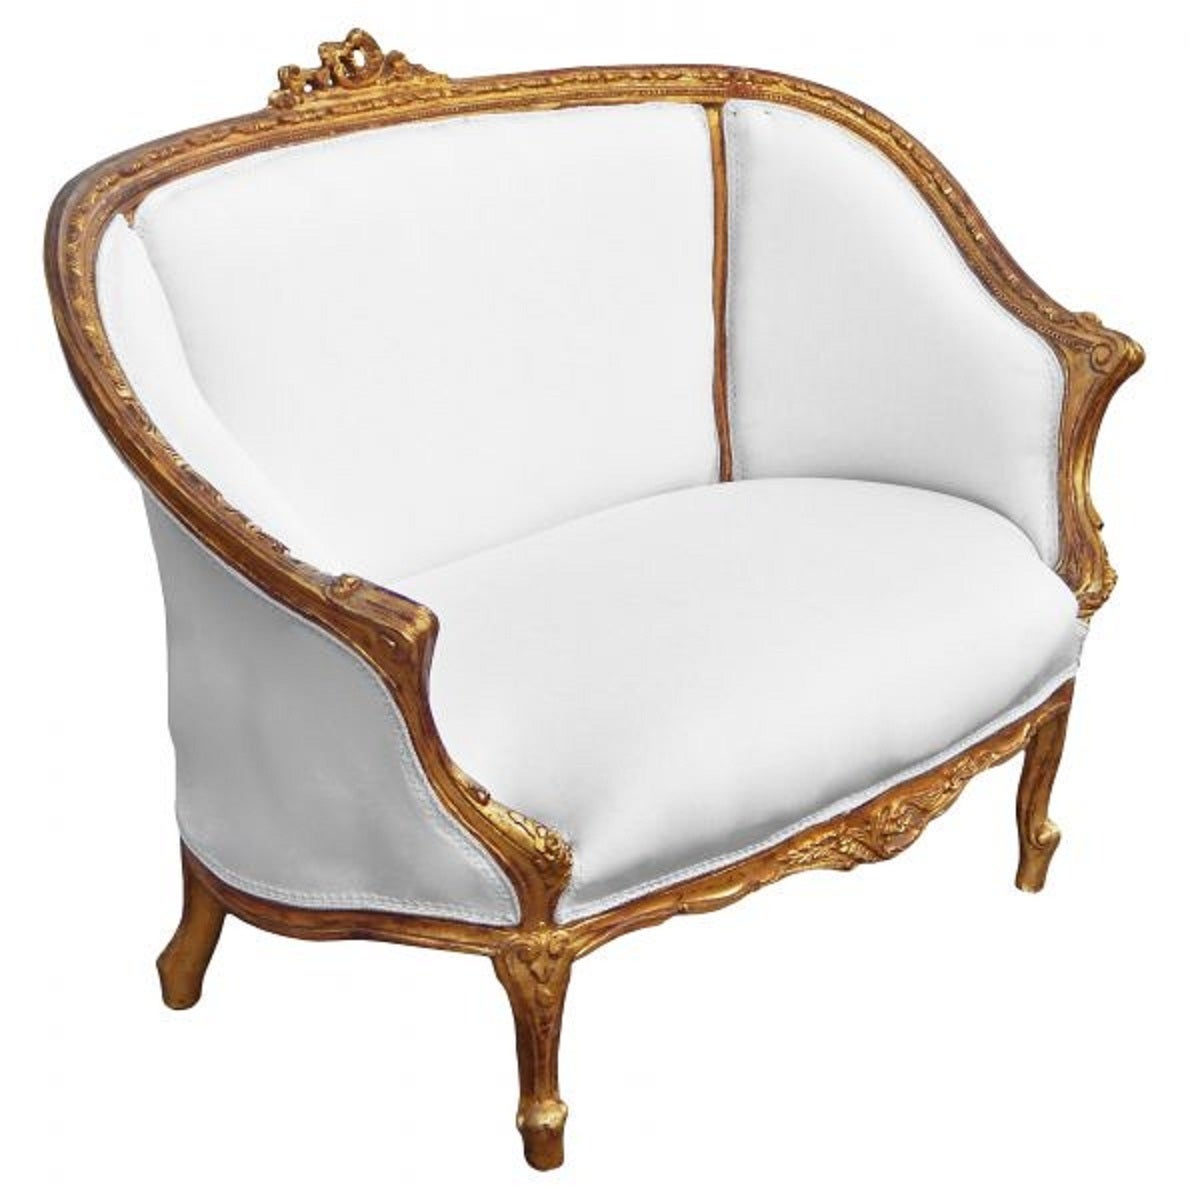 Beautiful Settee in the French Louis XVI style. Solid wood frame painted in gold leaf with carvings. Newly upholstered in white cotton fabric.